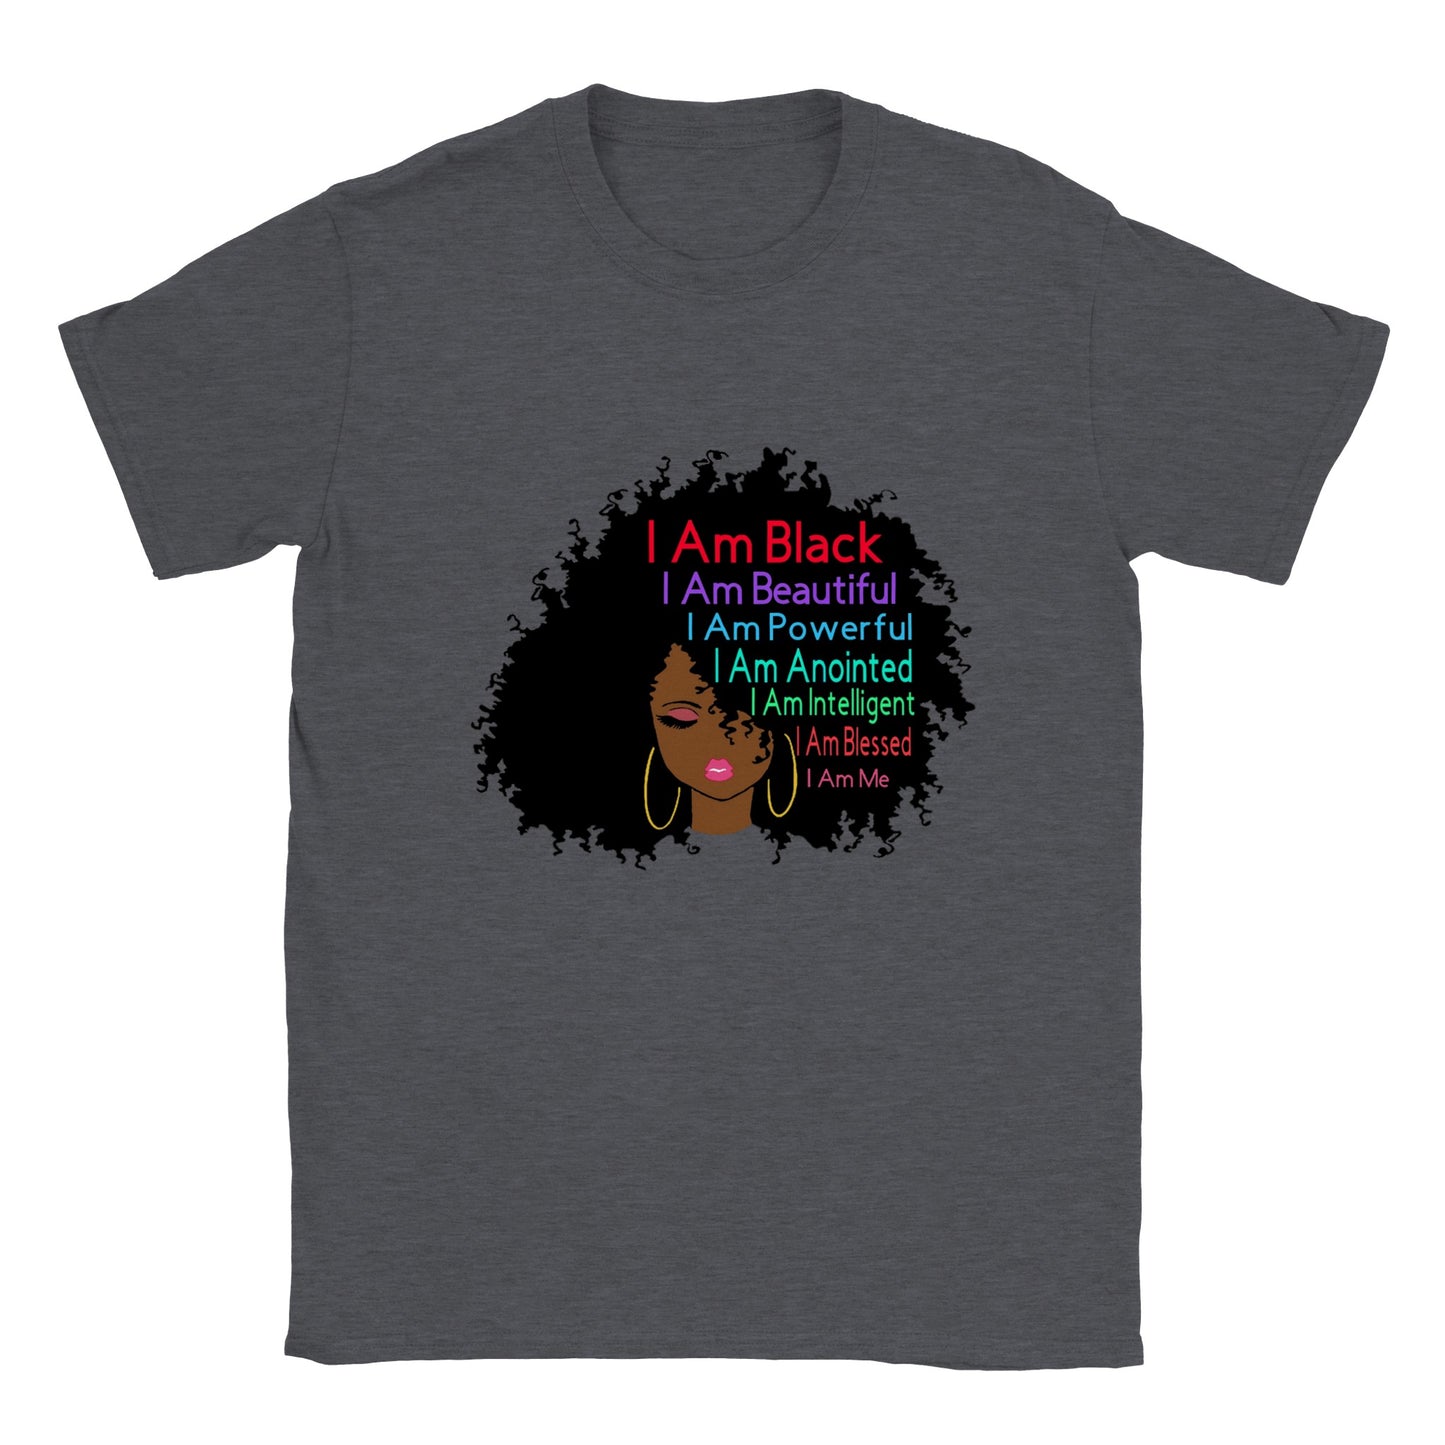 I Am Black, Beautiful, Powerful, Anointed, Intelligent, Blessed T-shirt